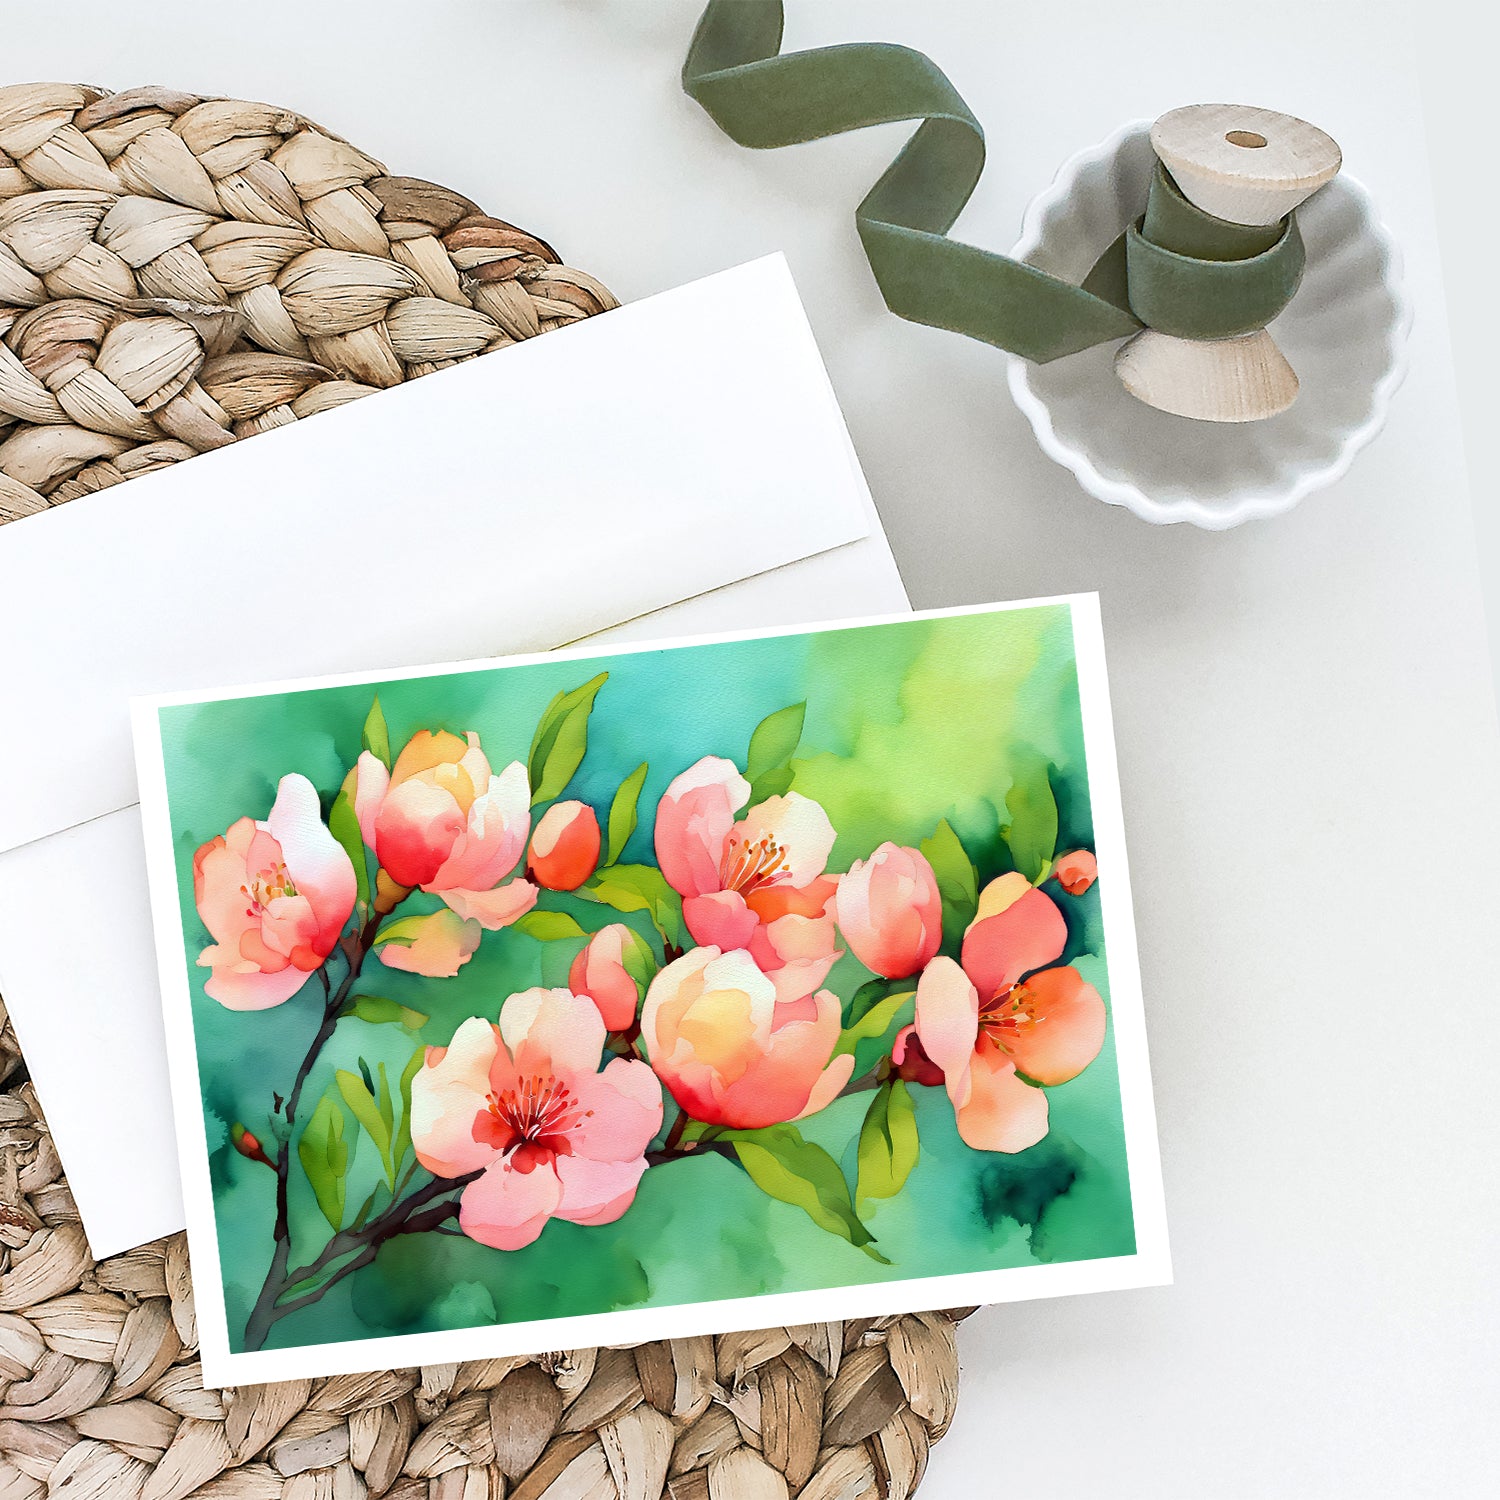 Delaware Peach Blossom in Watercolor Greeting Cards and Envelopes Pack of 8